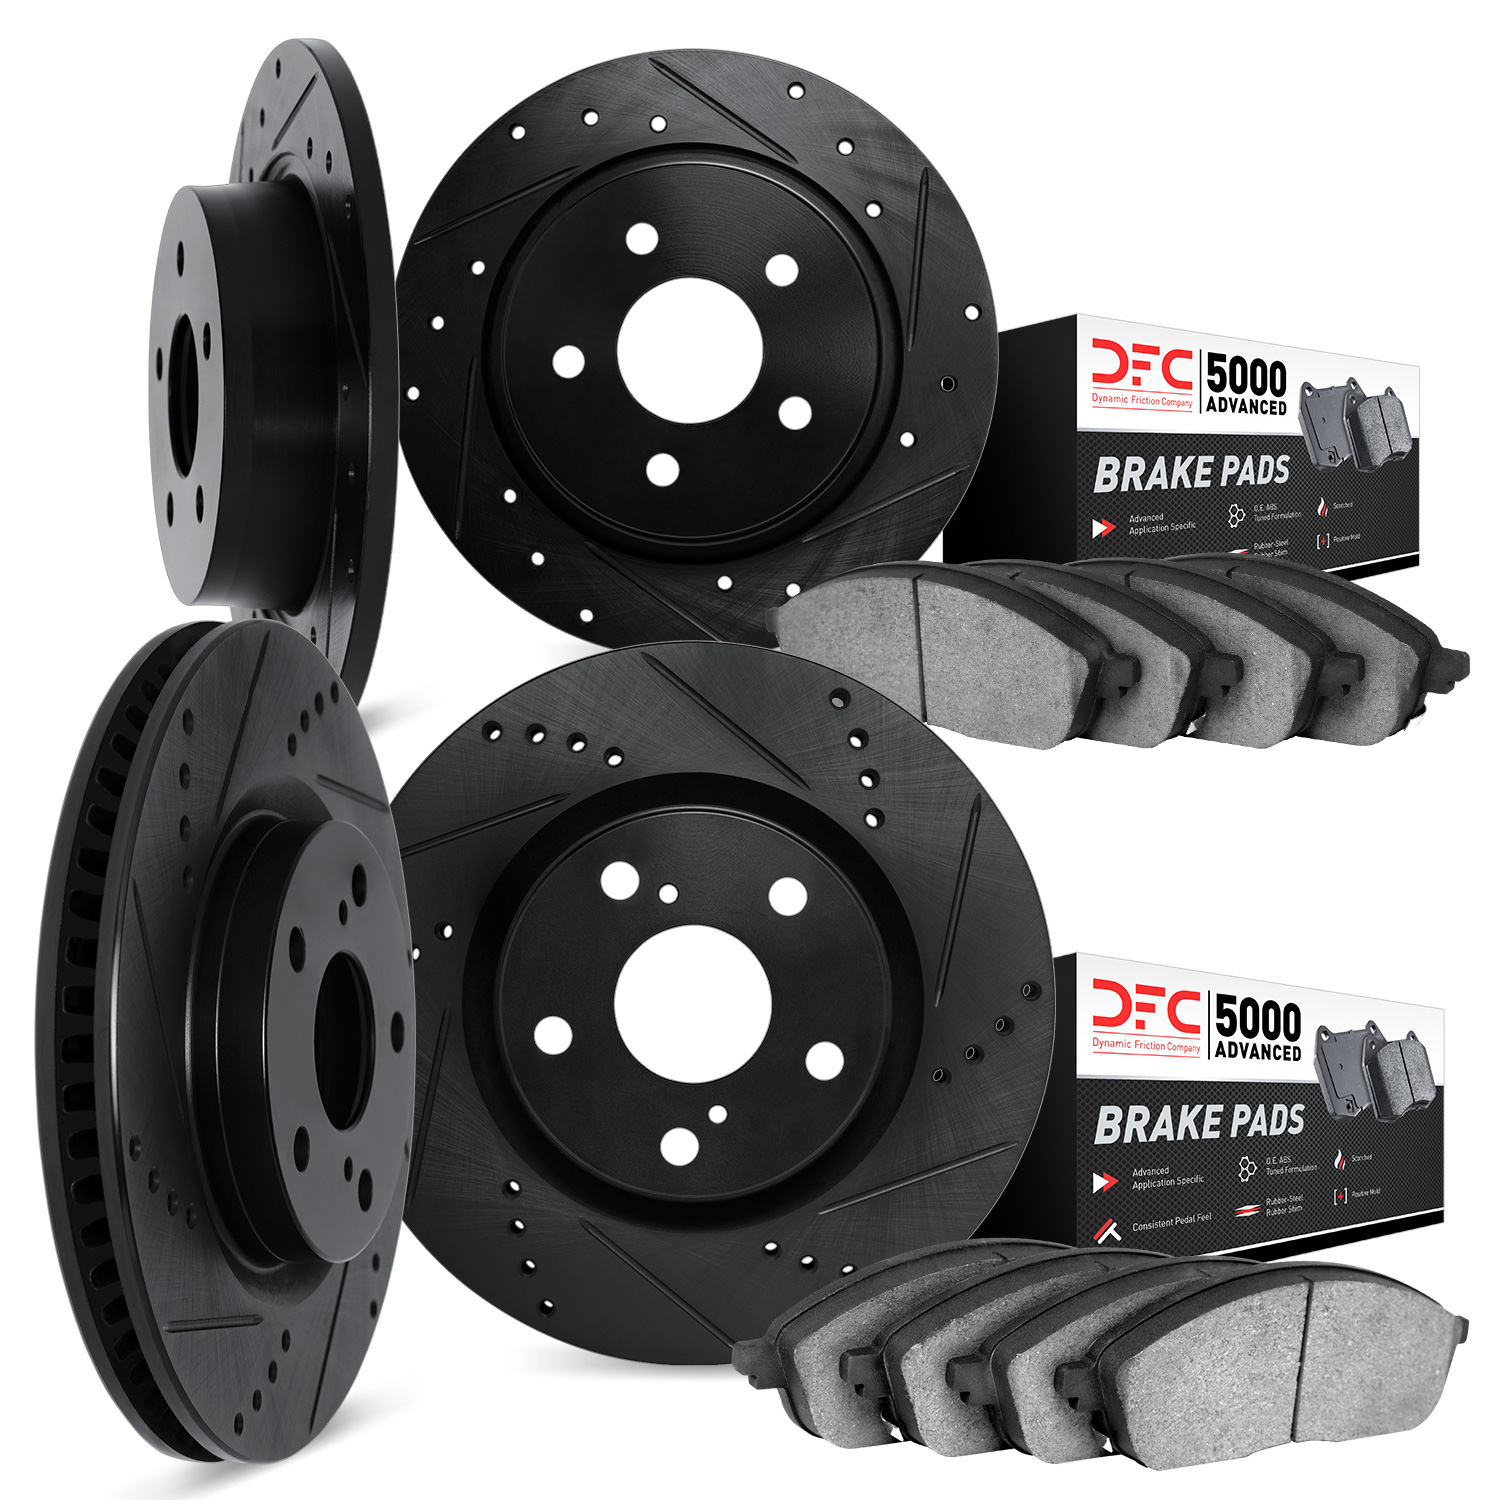 8504-67094 Drilled/Slotted Brake Rotors w/5000 Advanced Brake Pads Kit [Black], 1999-2000 Infiniti/Nissan, Position: Front and R